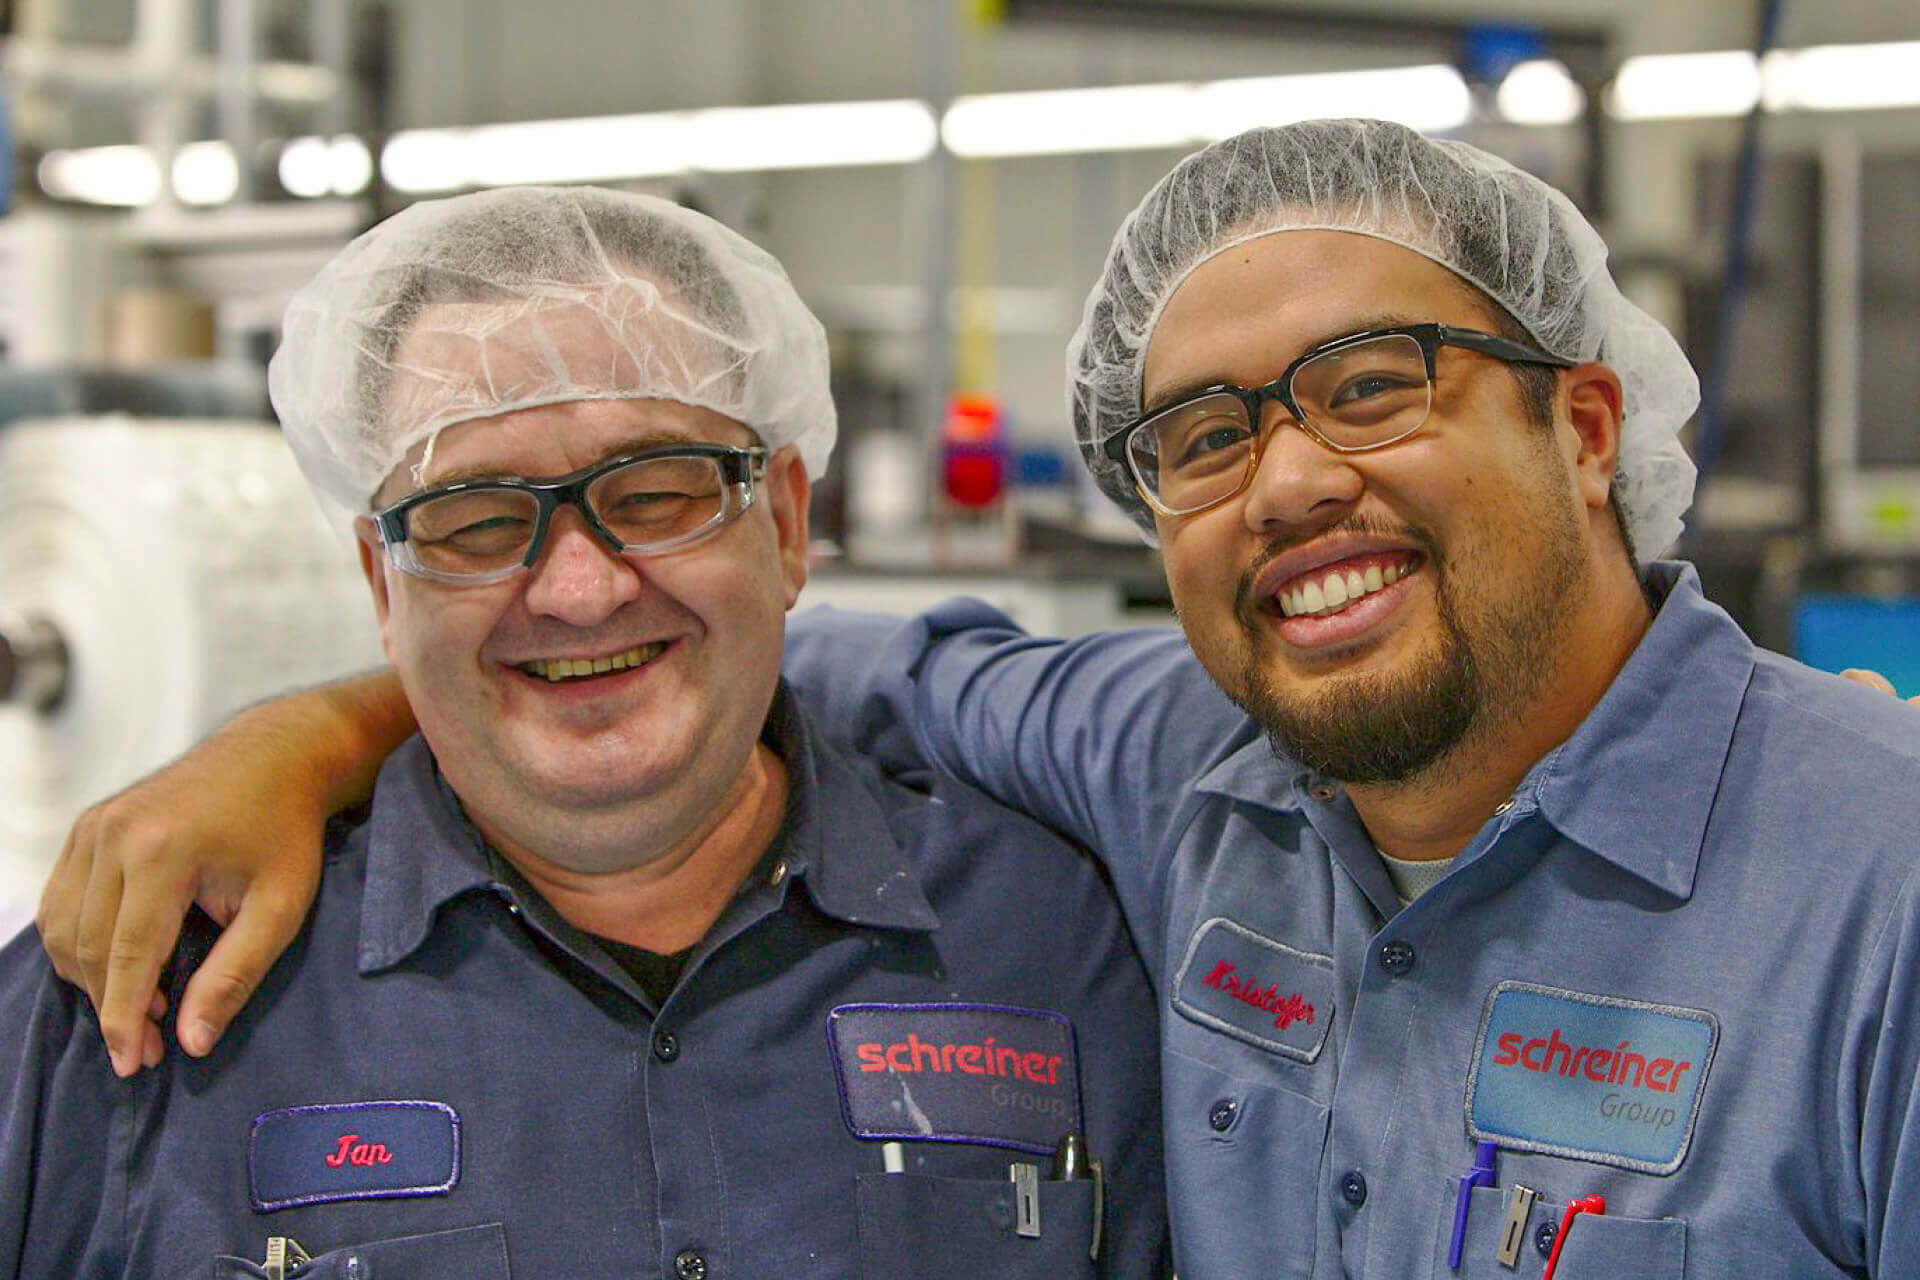 “Enthusiasm” is one of Schreiner Group’s four corporate values being “lived” also at the US plant in Blauvelt.